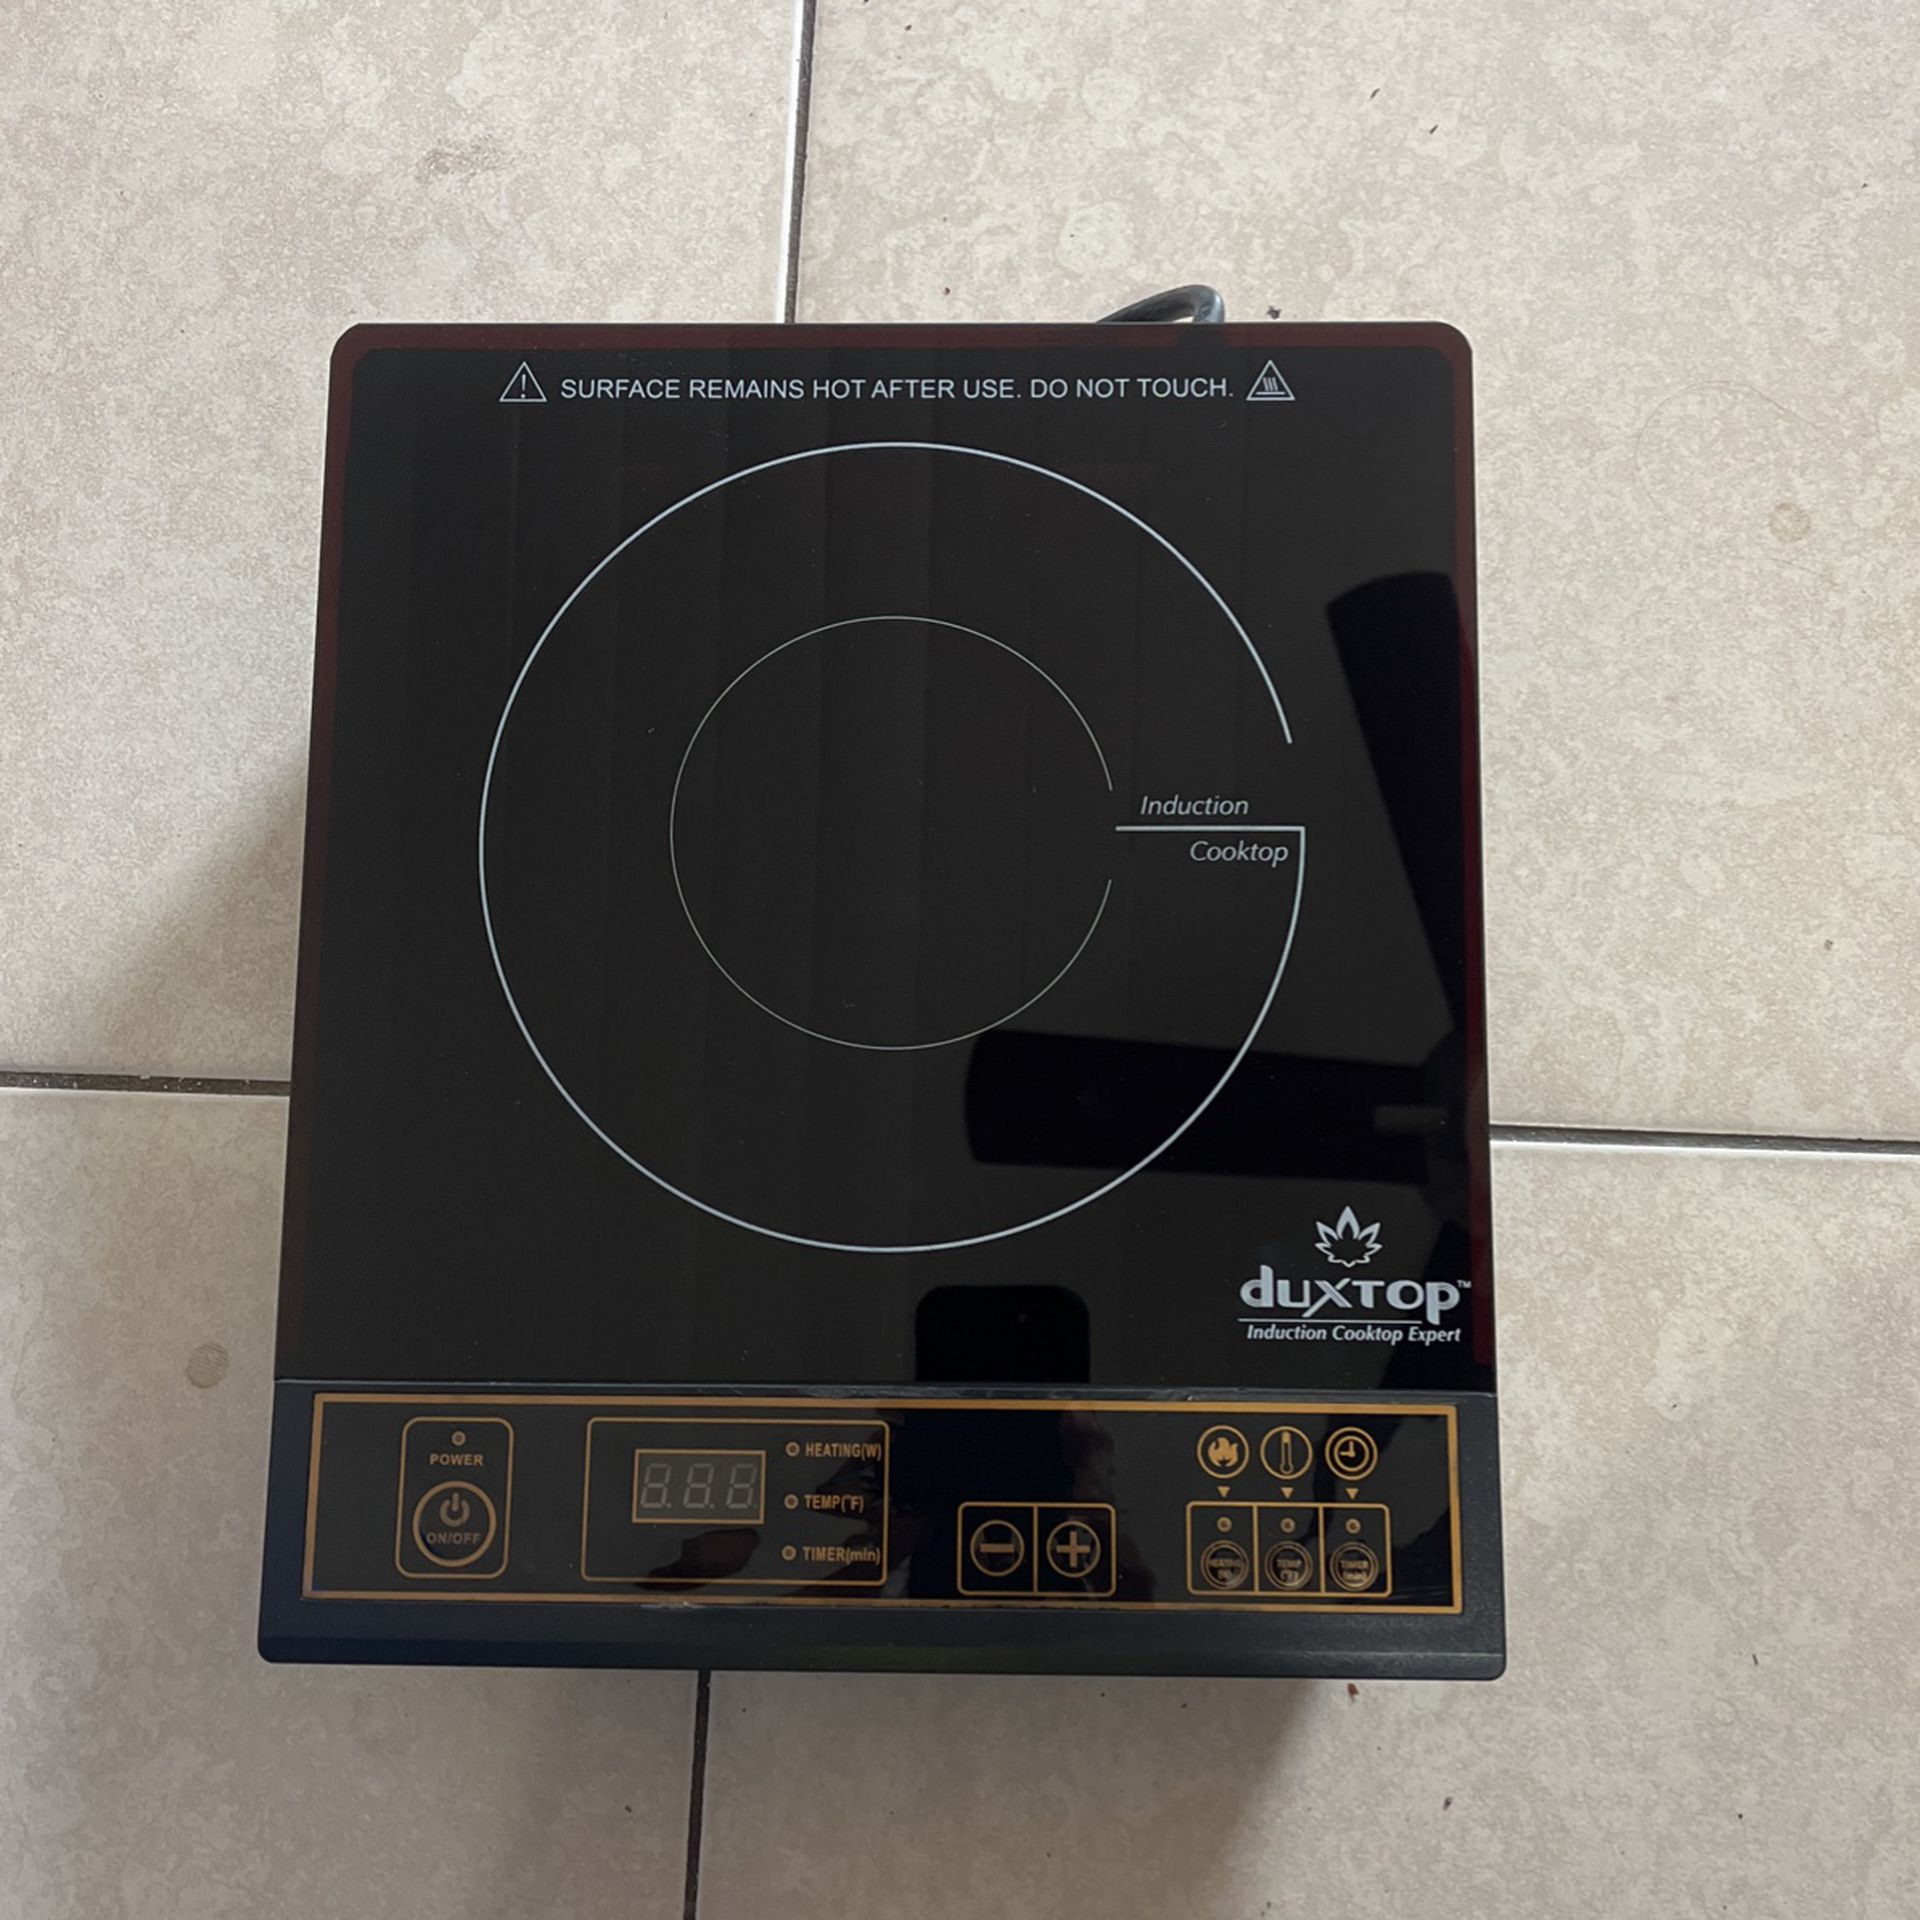 Duxtop Induction Cooktop Expert for Sale in Tampa, FL - OfferUp